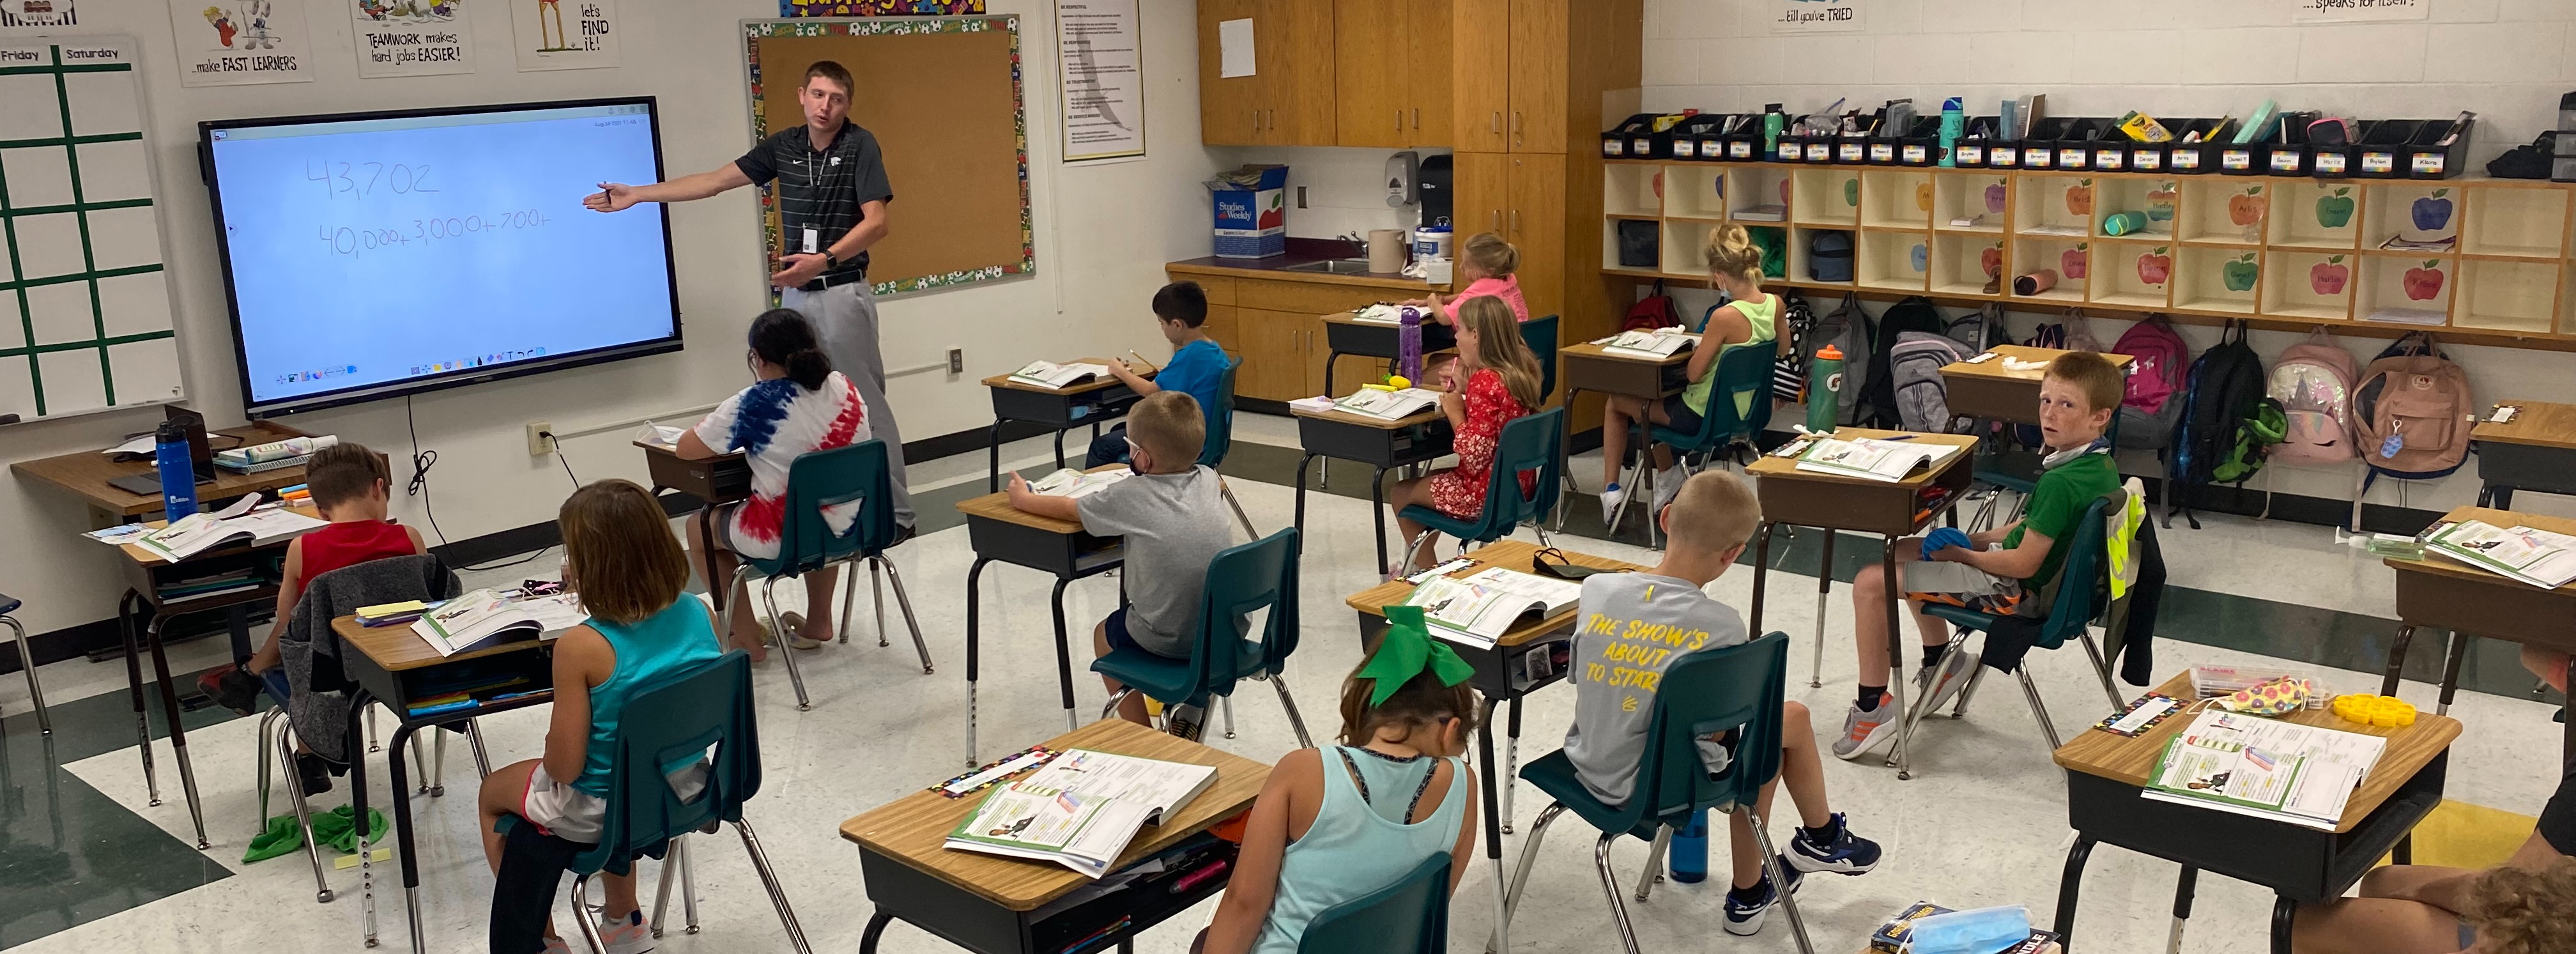 Back to School in Olpe Elementary